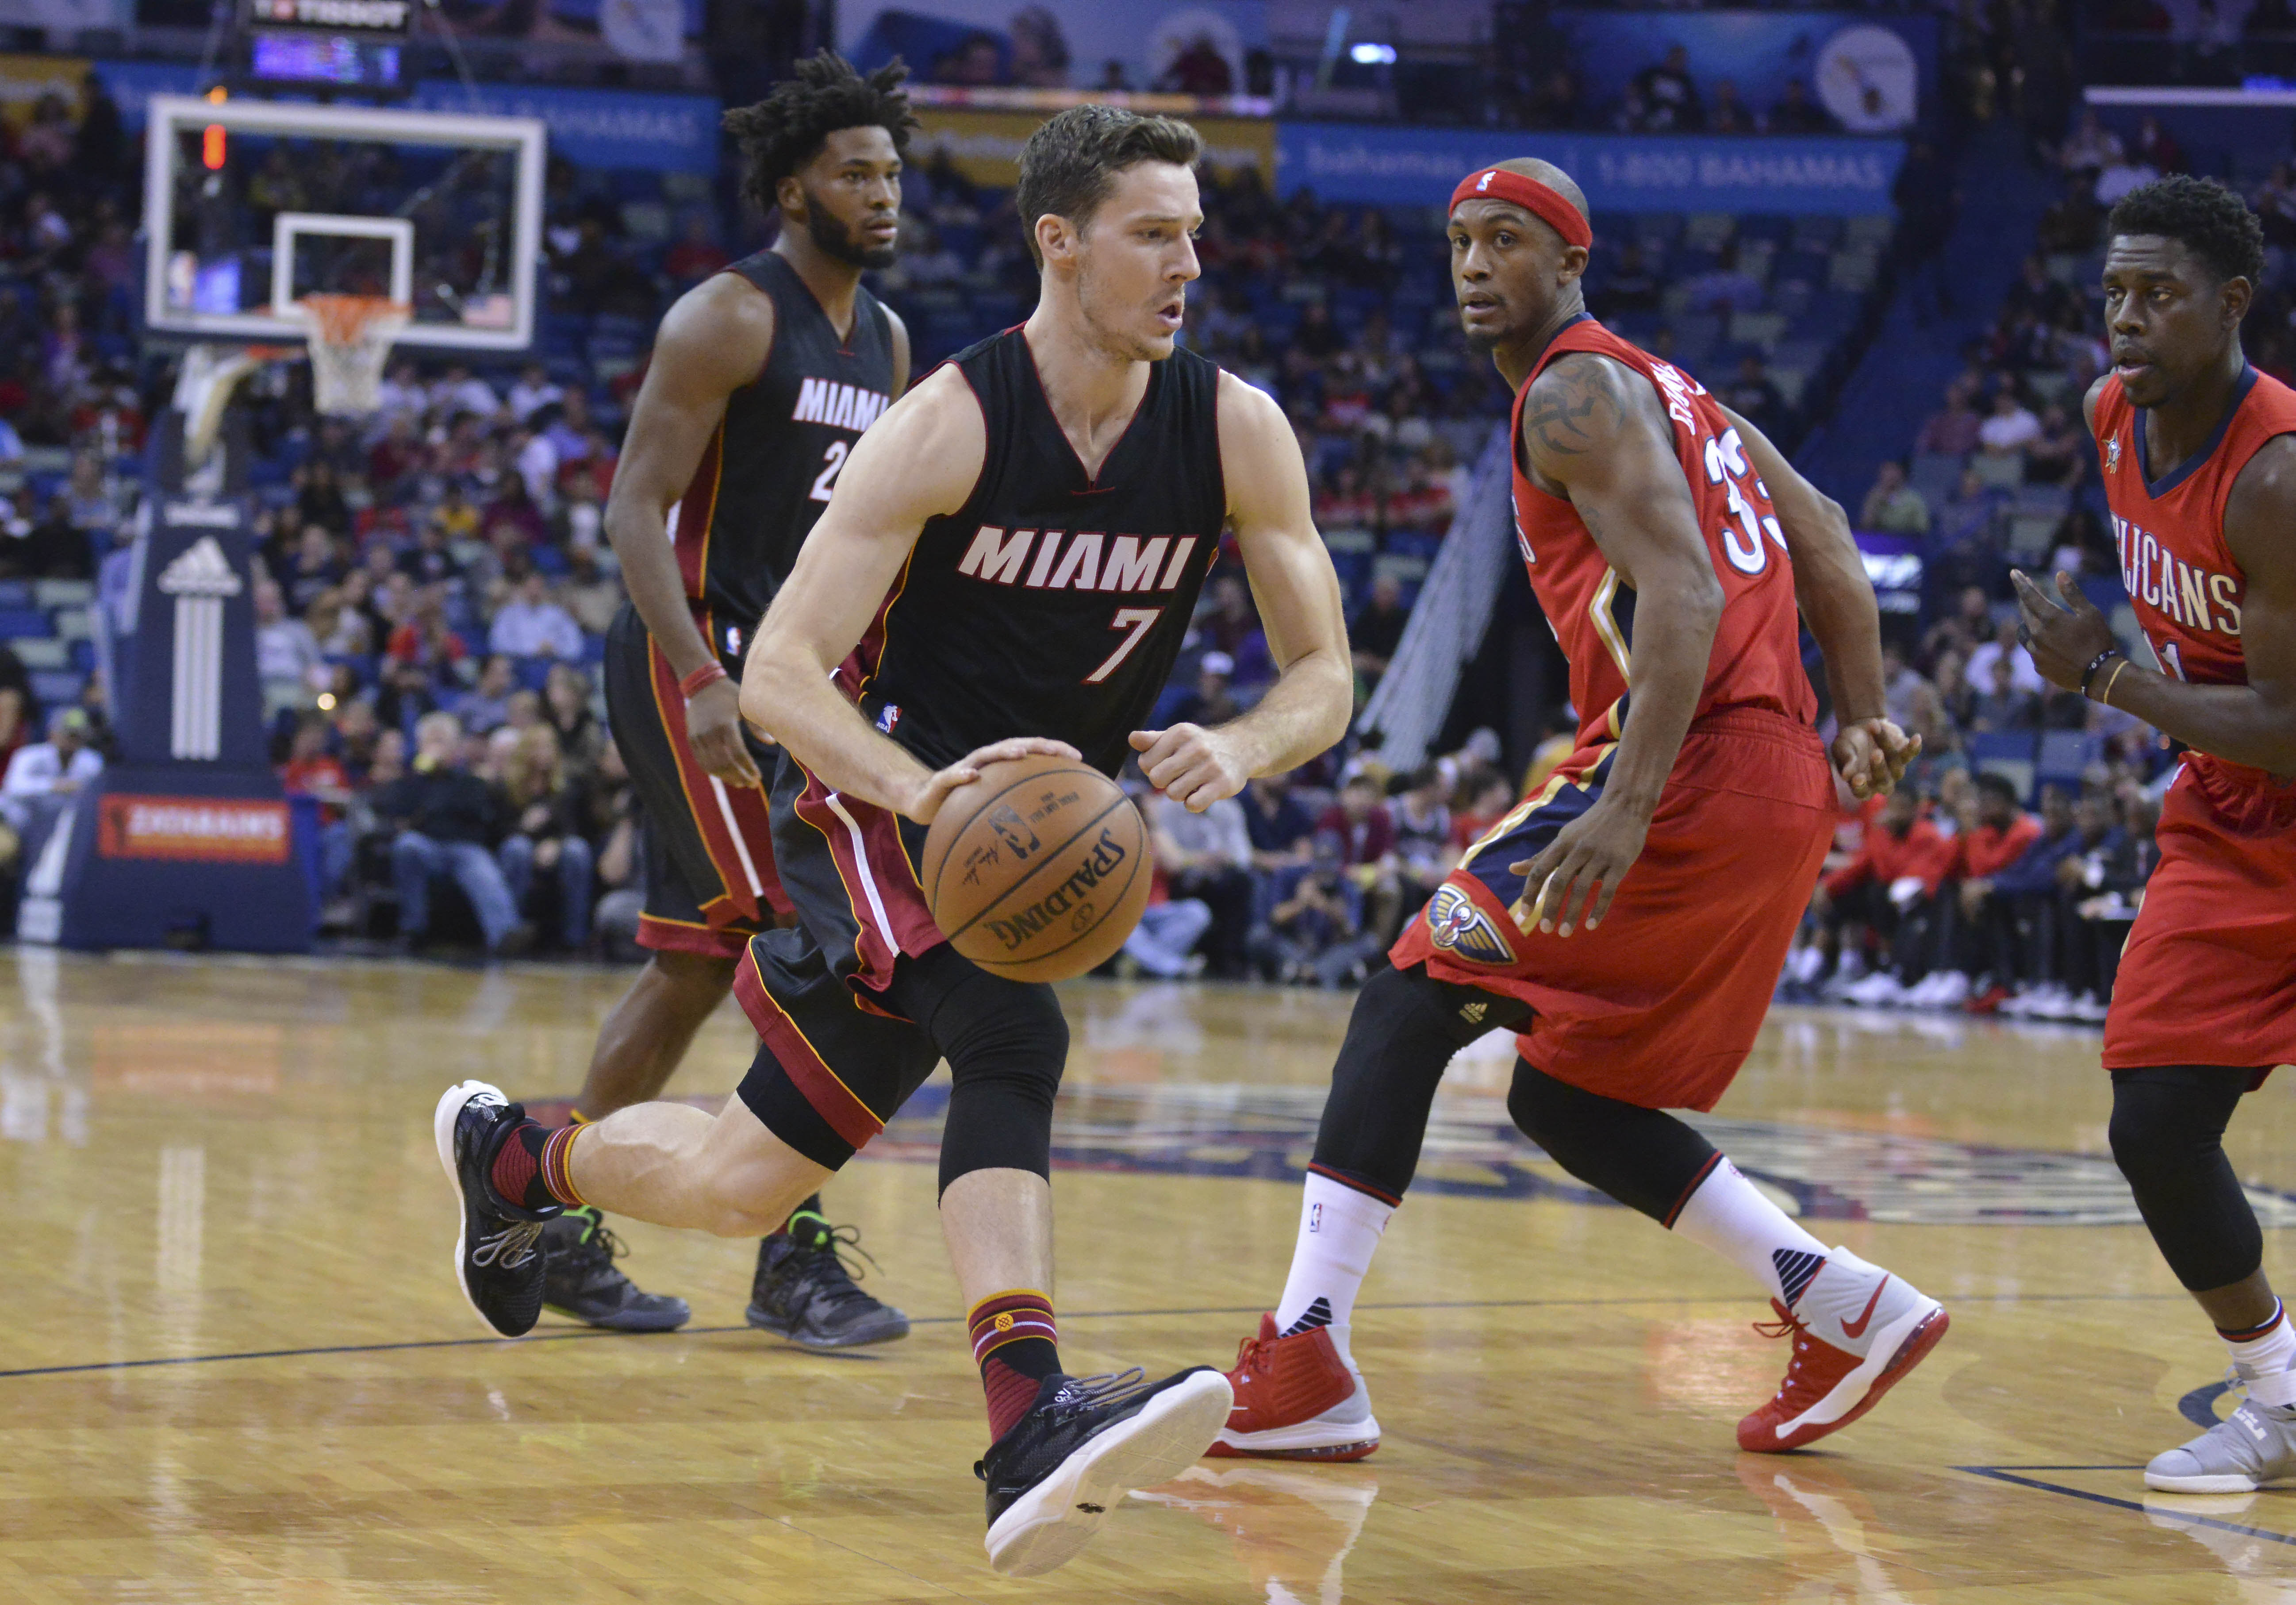 Pelicans at Heat live stream: How to watch online - FanSided5190 x 3627